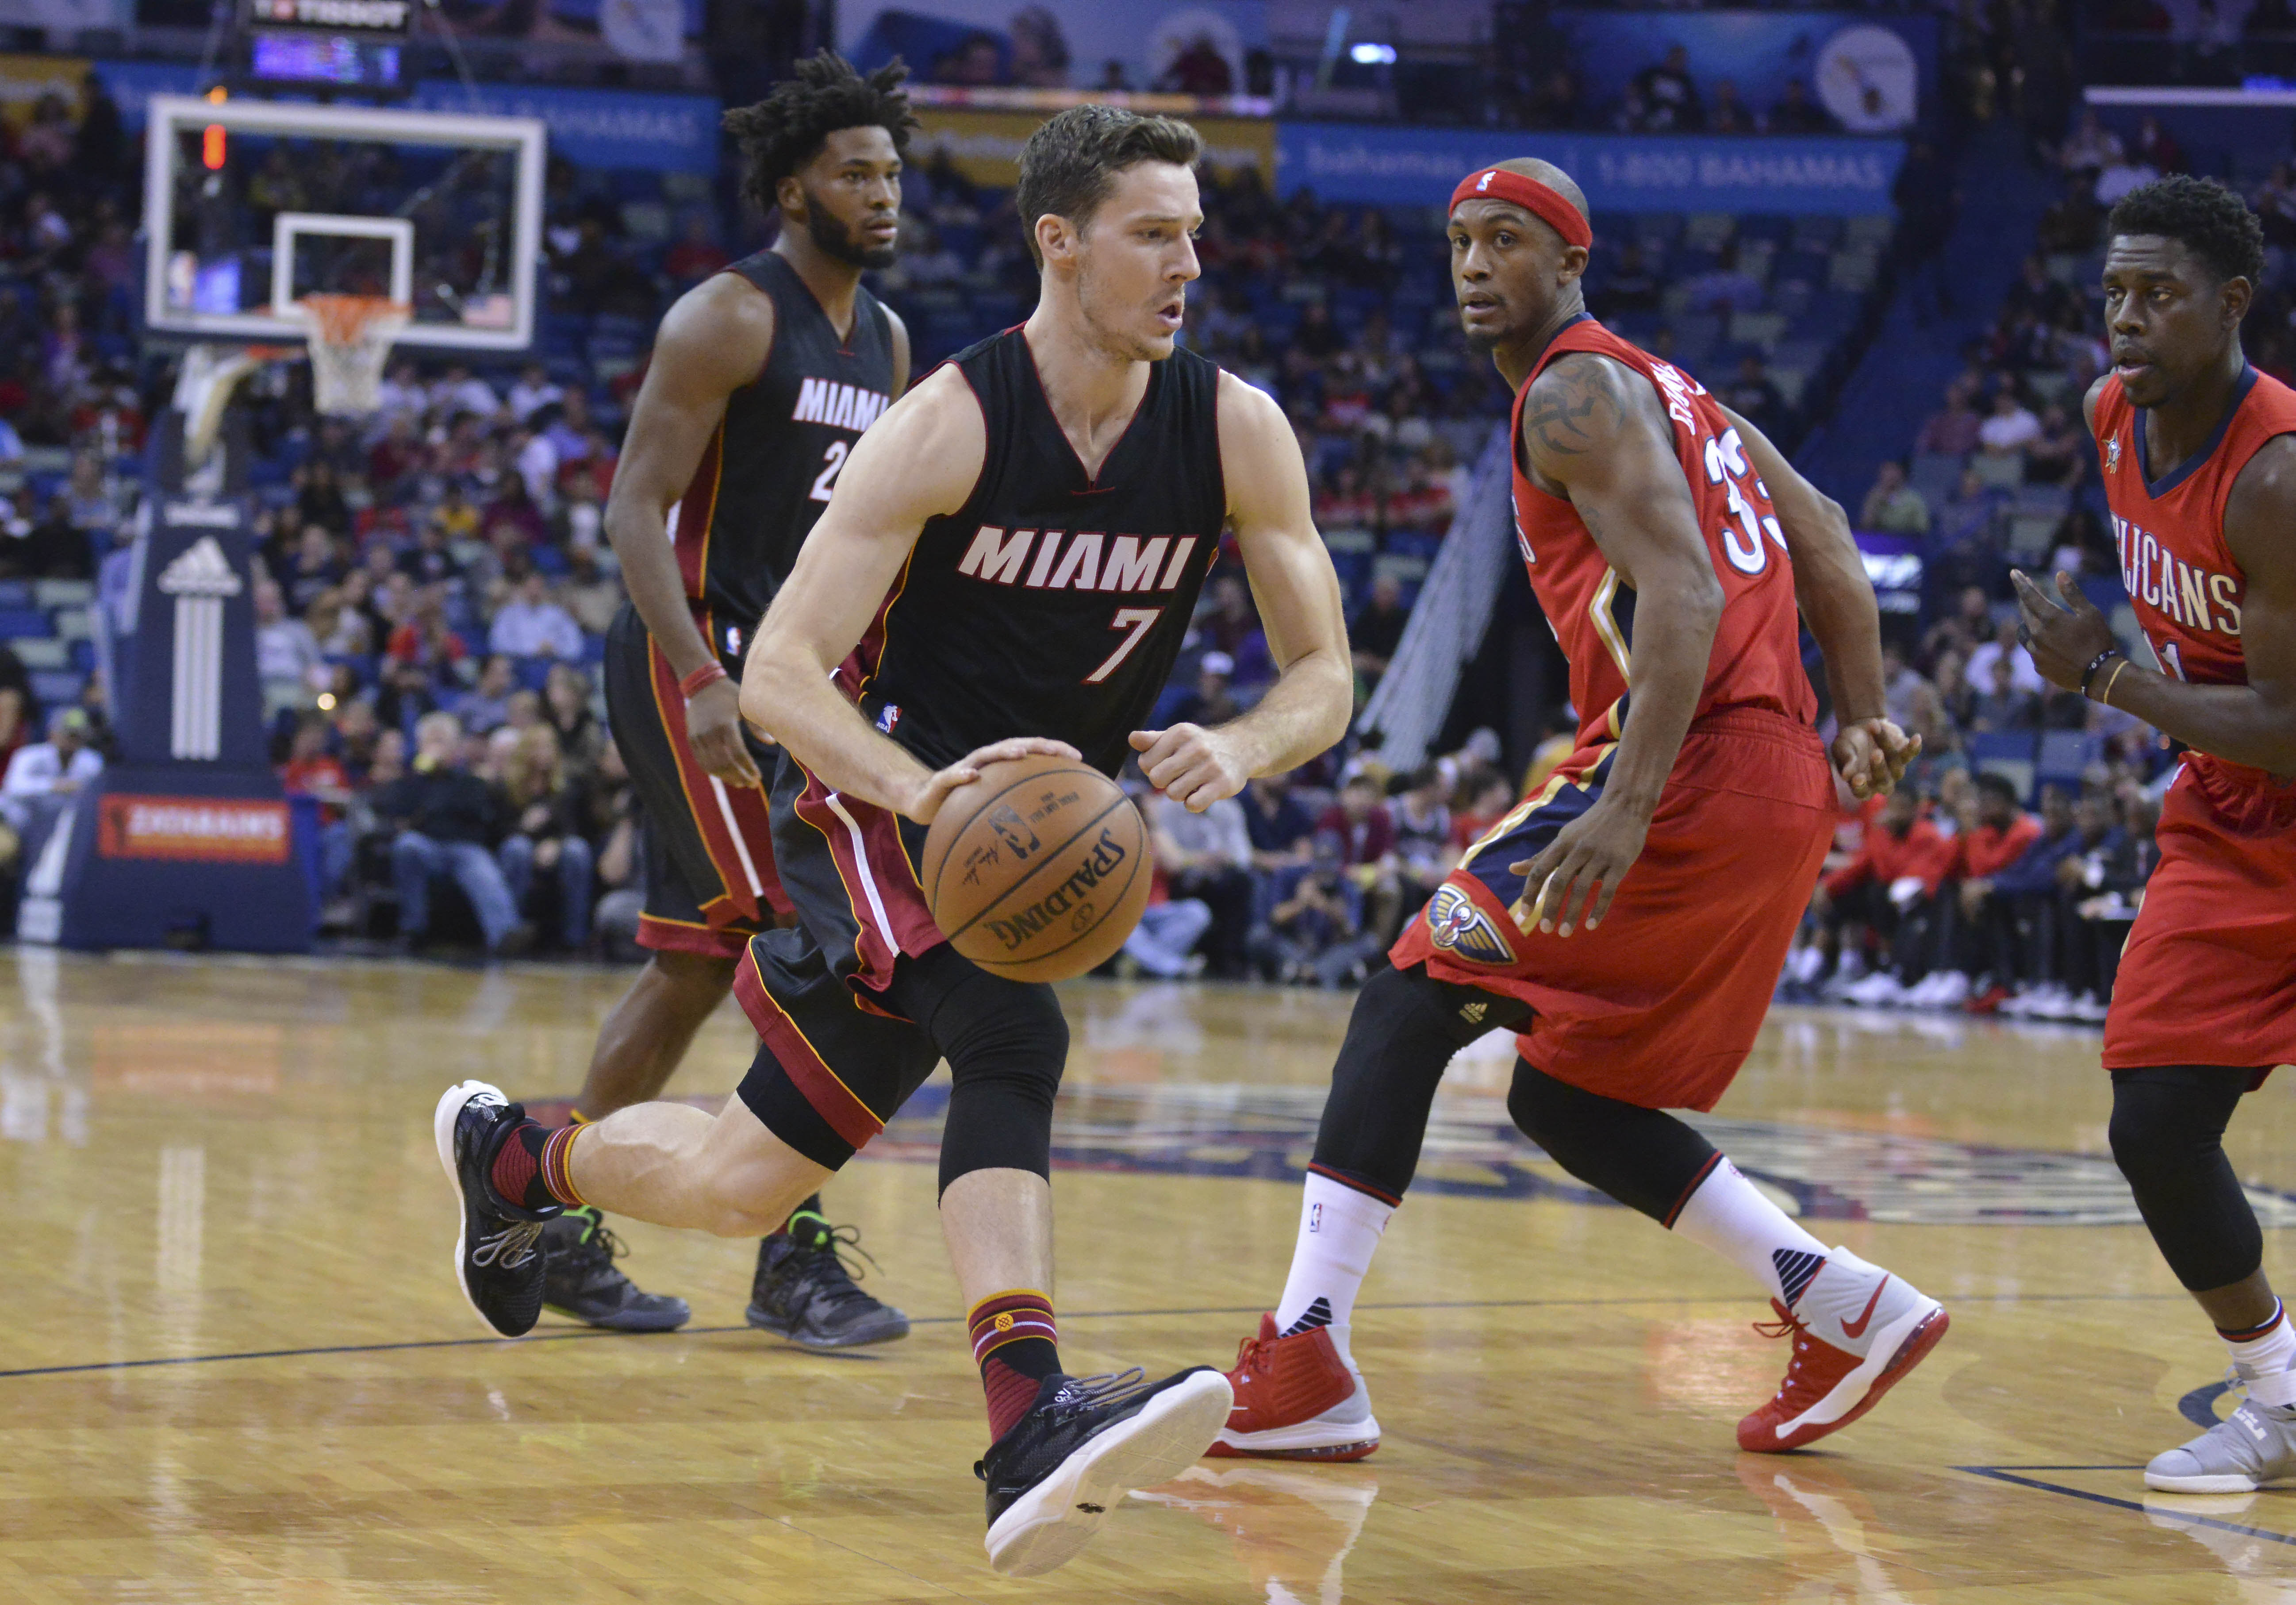 Pelicans at Heat live stream: How to watch online - FanSided5190 x 3627